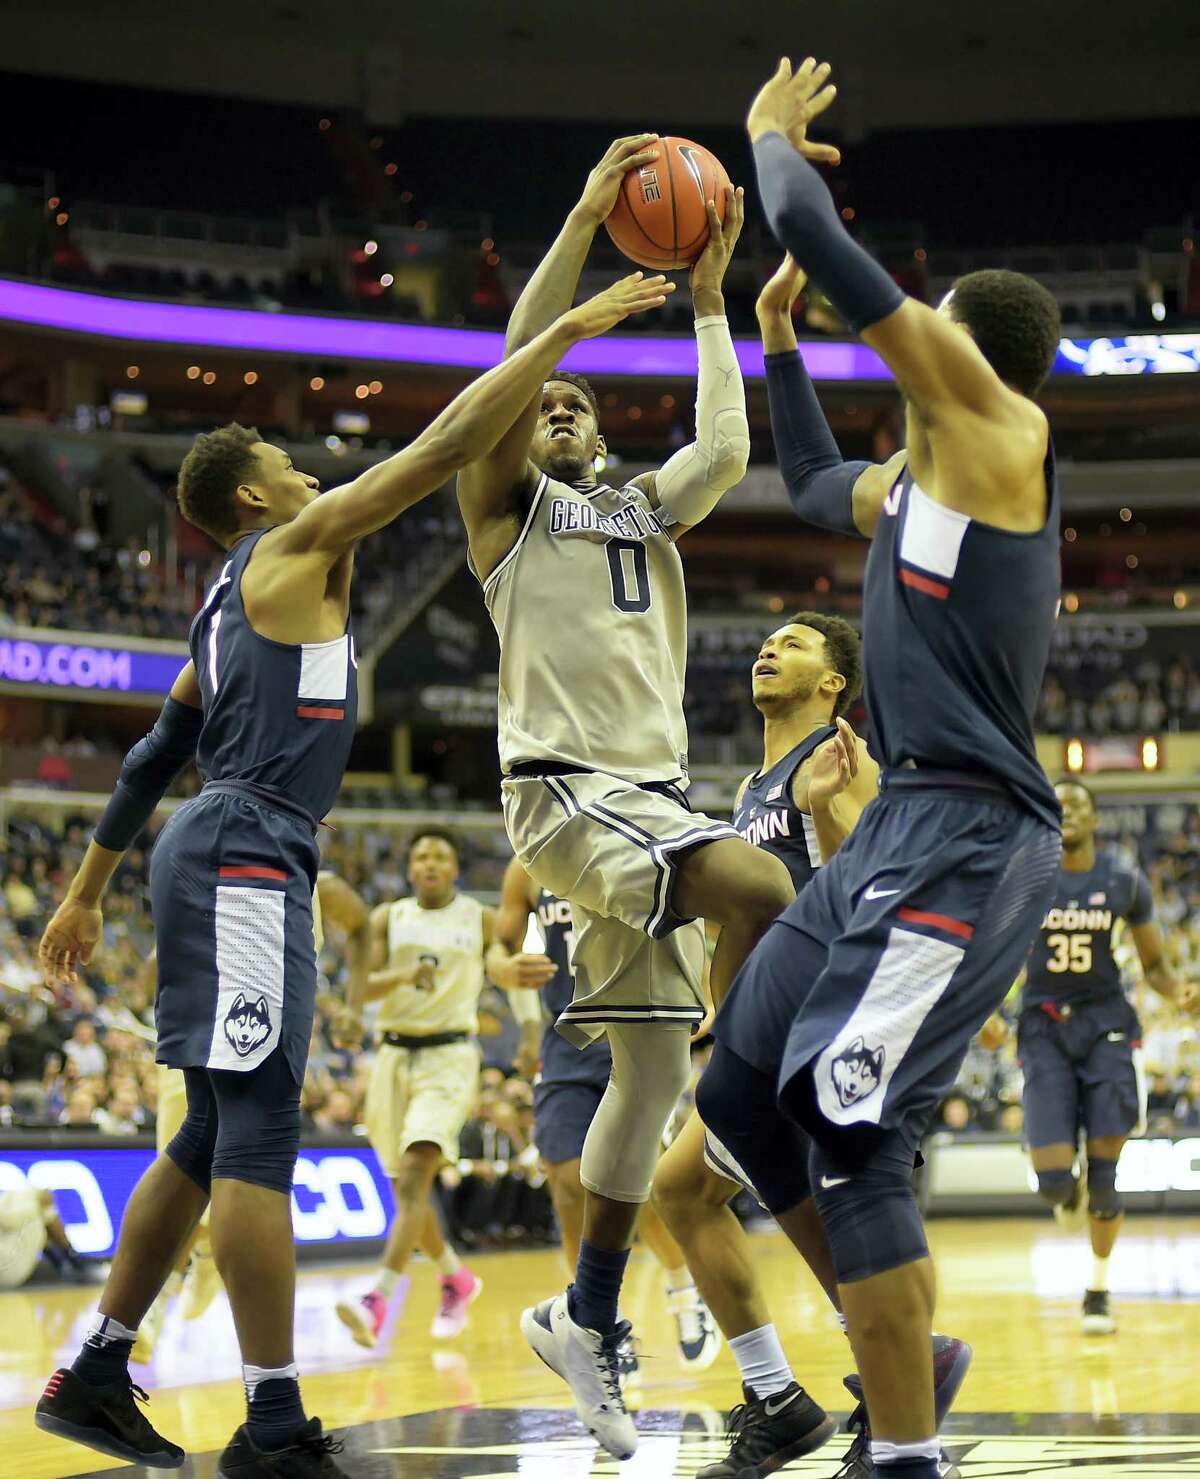 Georgetown’s’ L.J. Peak, center, drives through several UConn defenders during Saturday’s game.